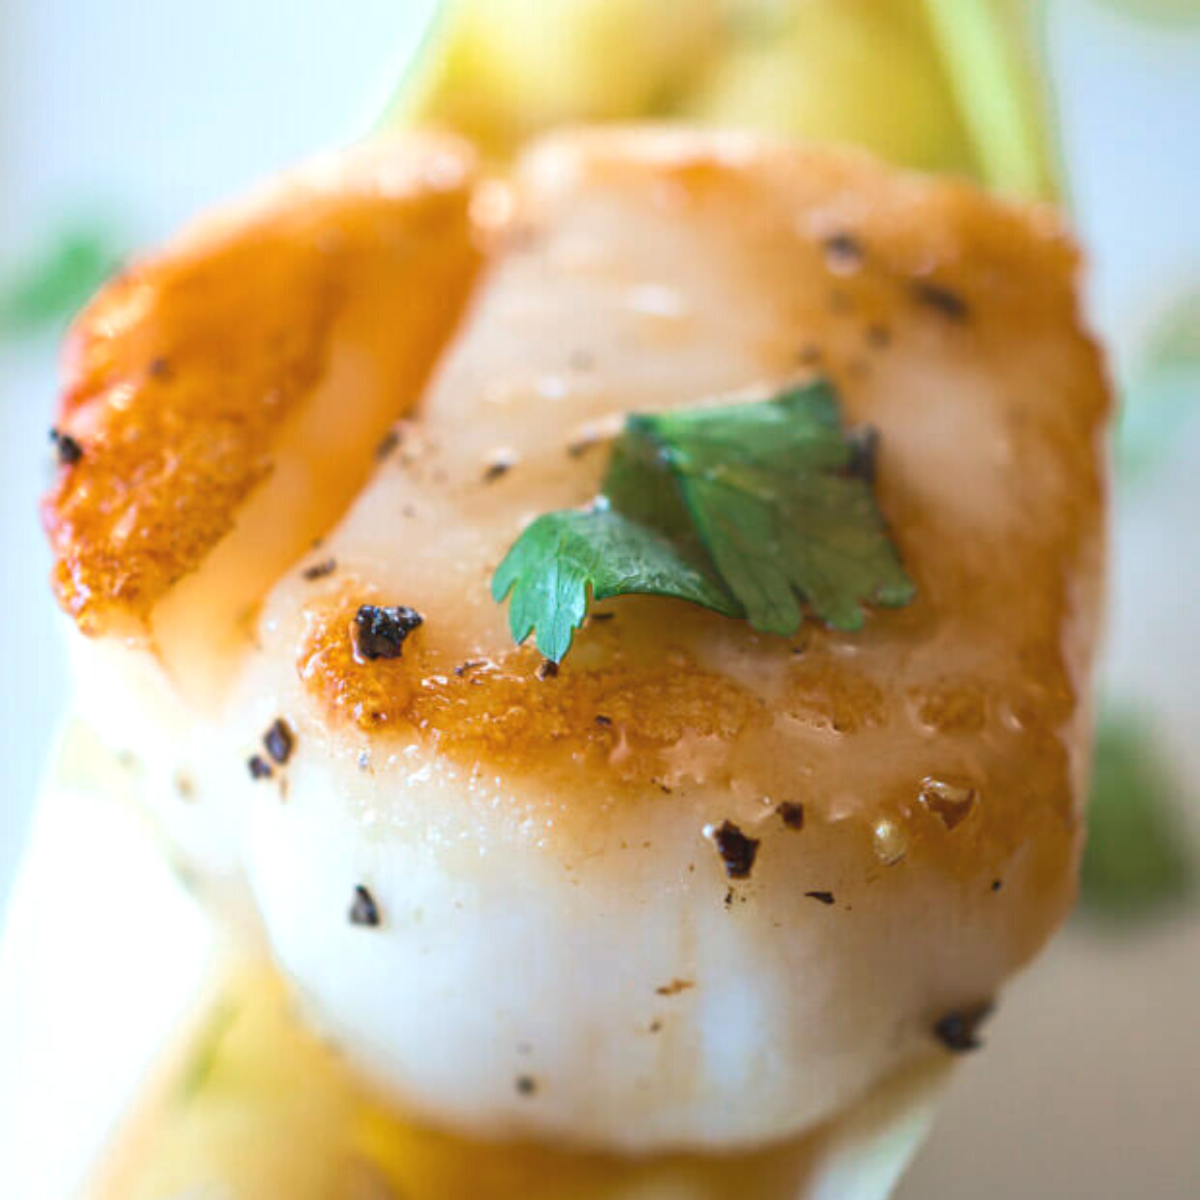 Close up view of a cooked scallop drizzed with wasabi sauce and garnished with cilantro and cracked black pepper - Hostess At Heart